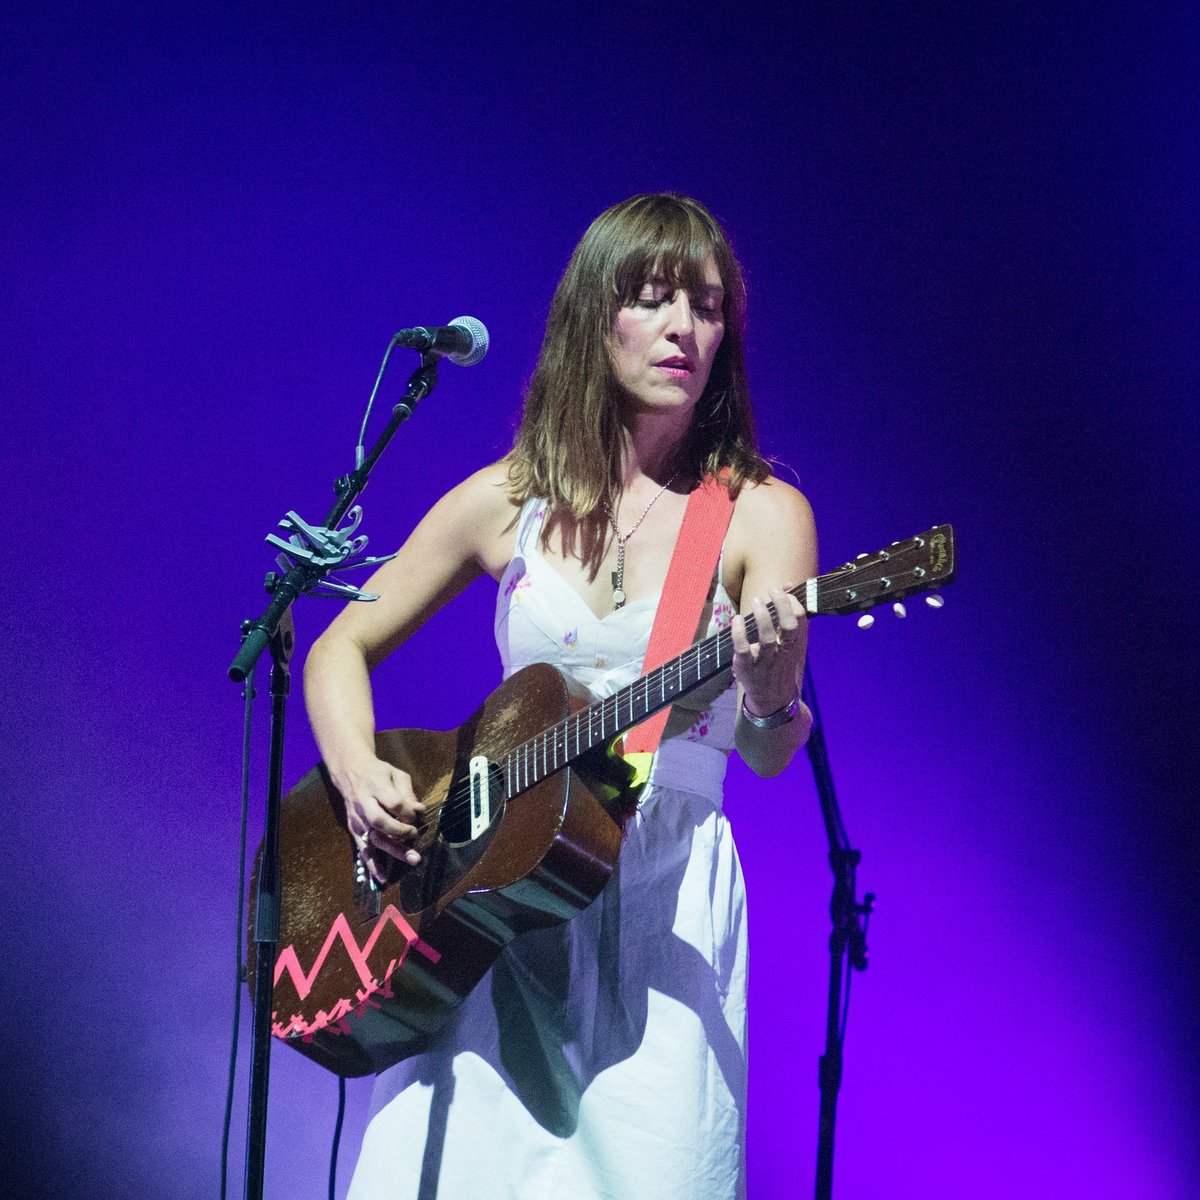 Feist bringing her musical magic into full effect with the M80.